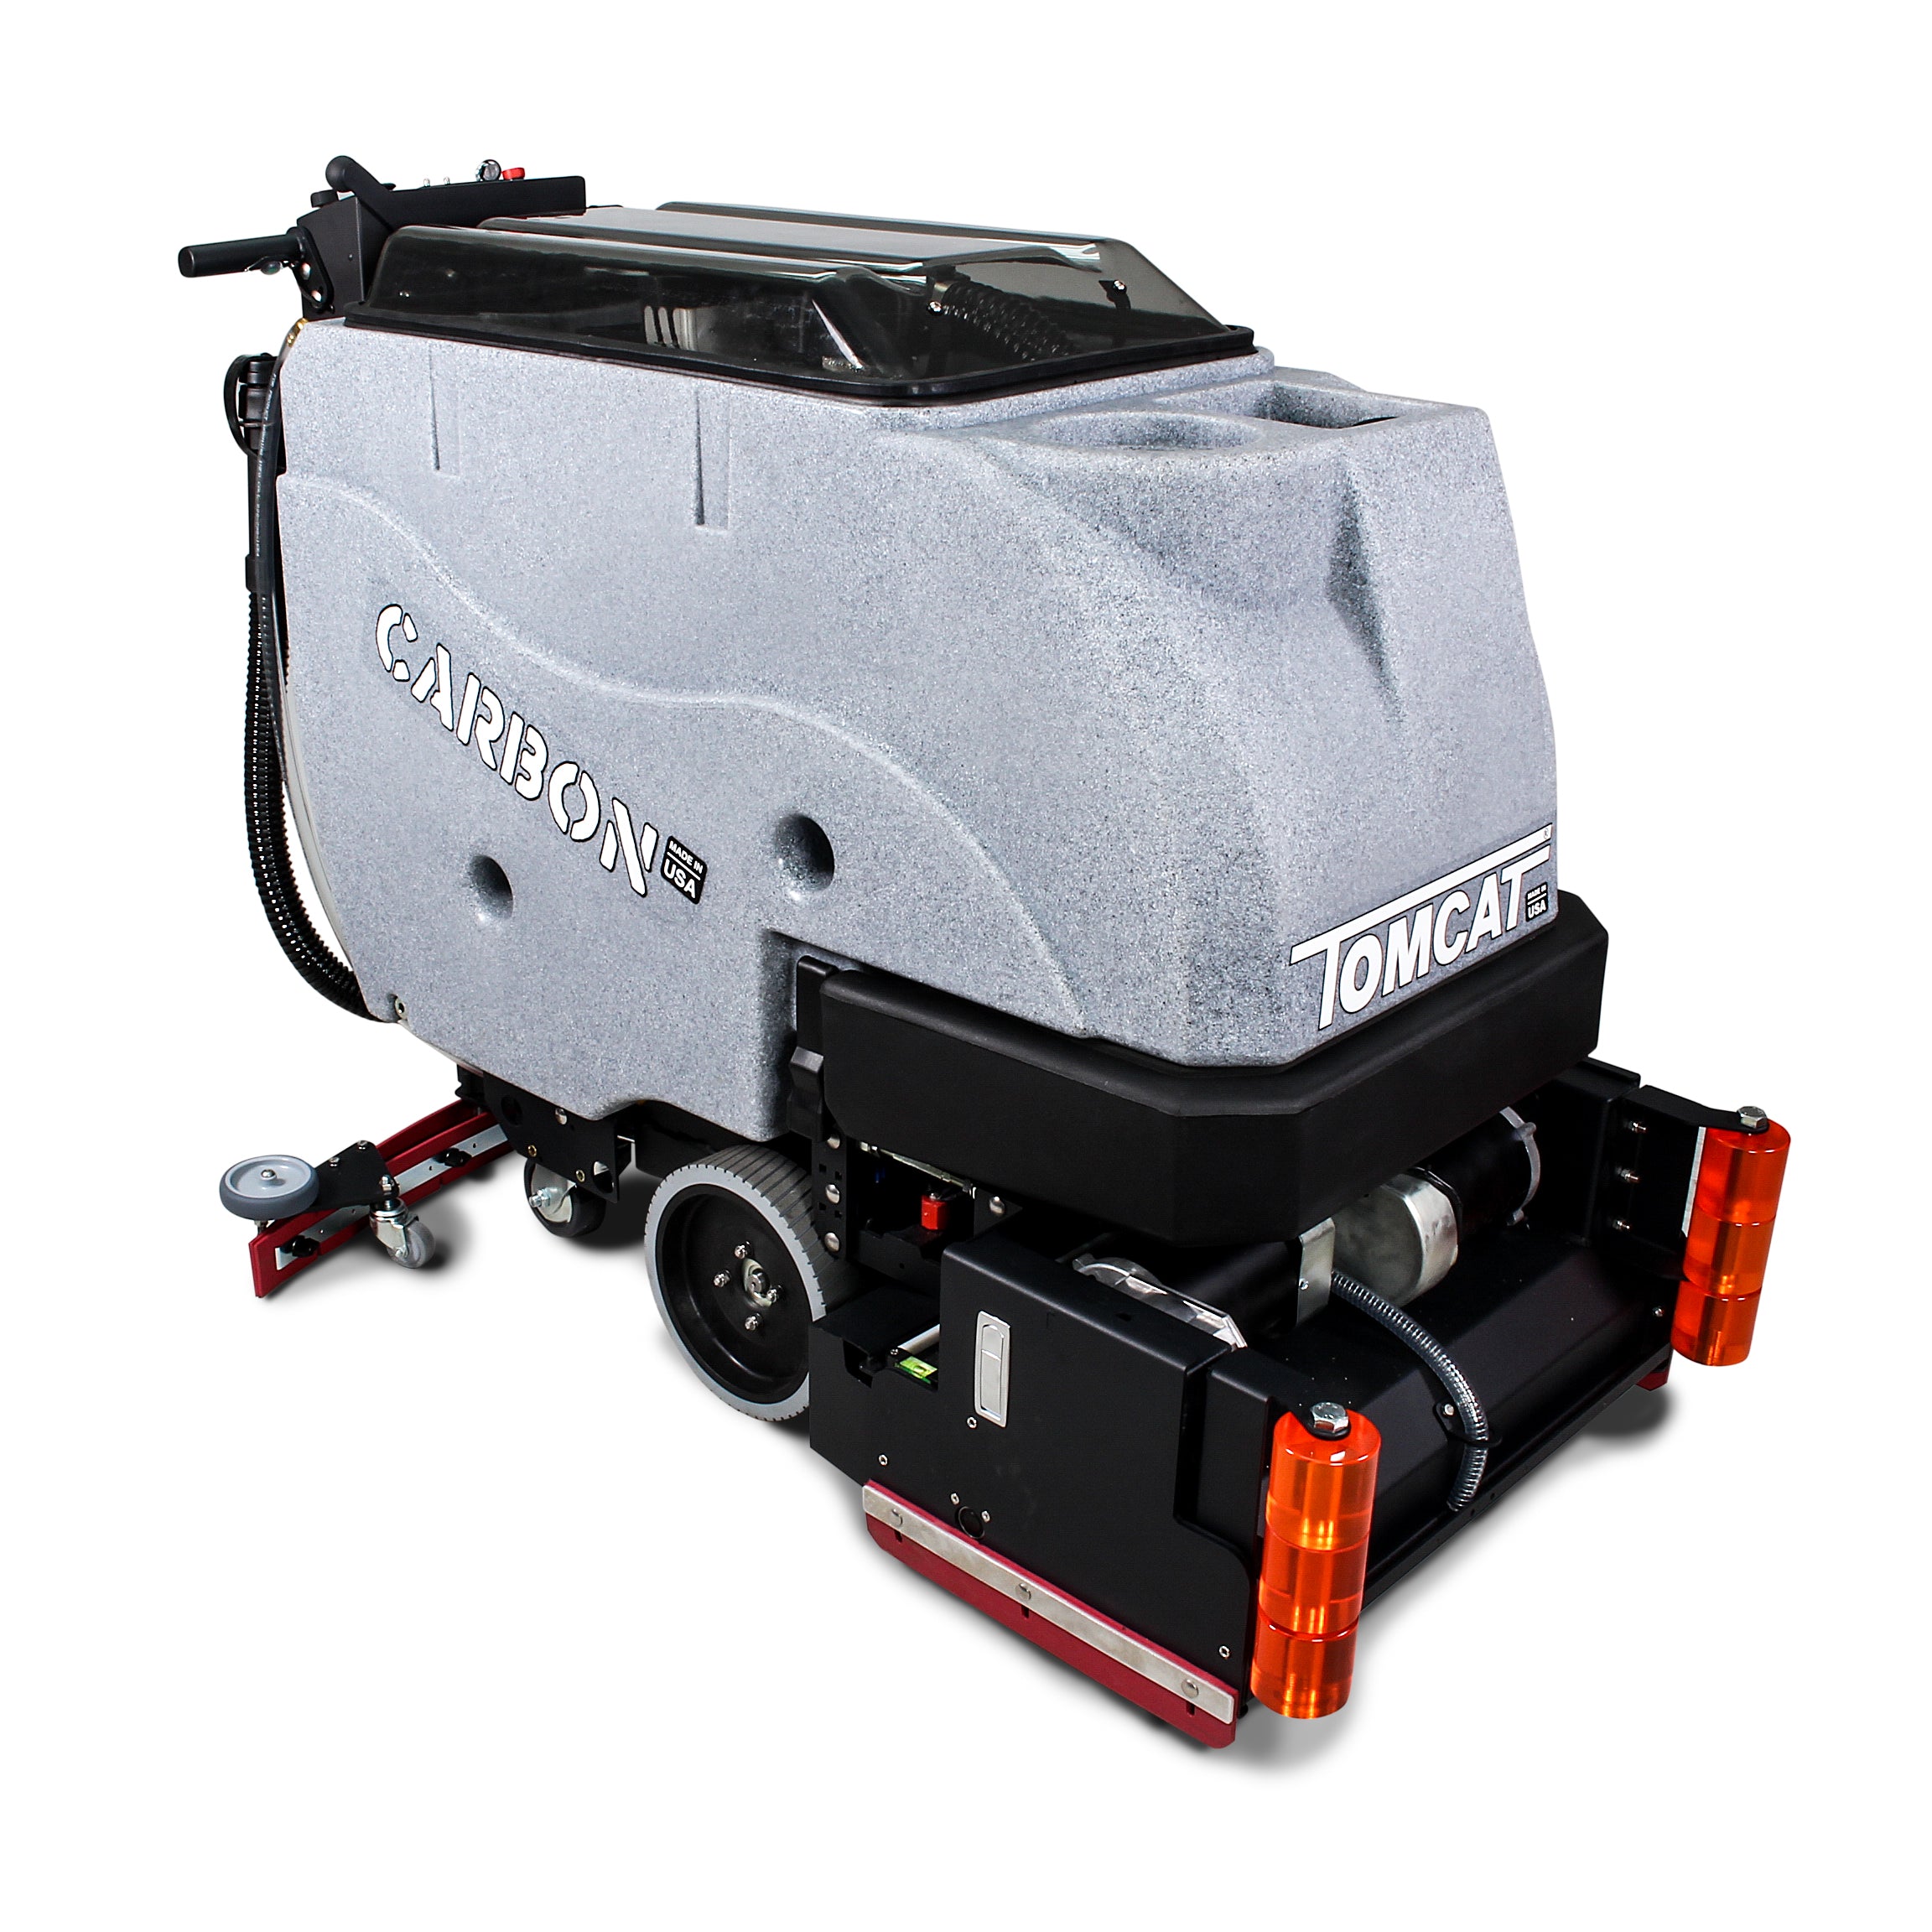 TOMCAT CARBON 29" CYLINDRICAL SCRUBBER DRIER - Ruck Engineering